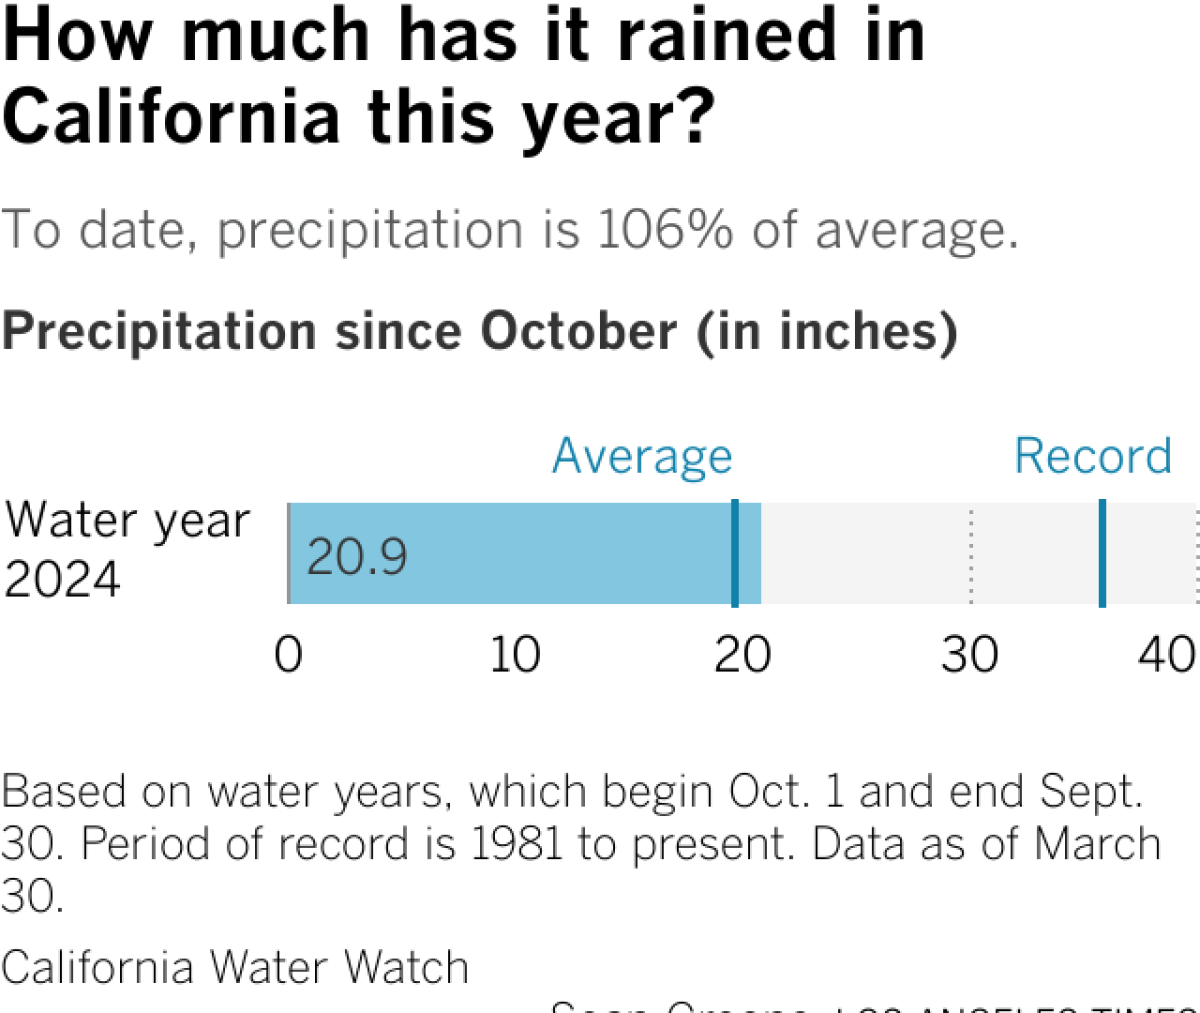 California has received 20.9 inches of rain so far this year, compared with an historical average of 19.7.